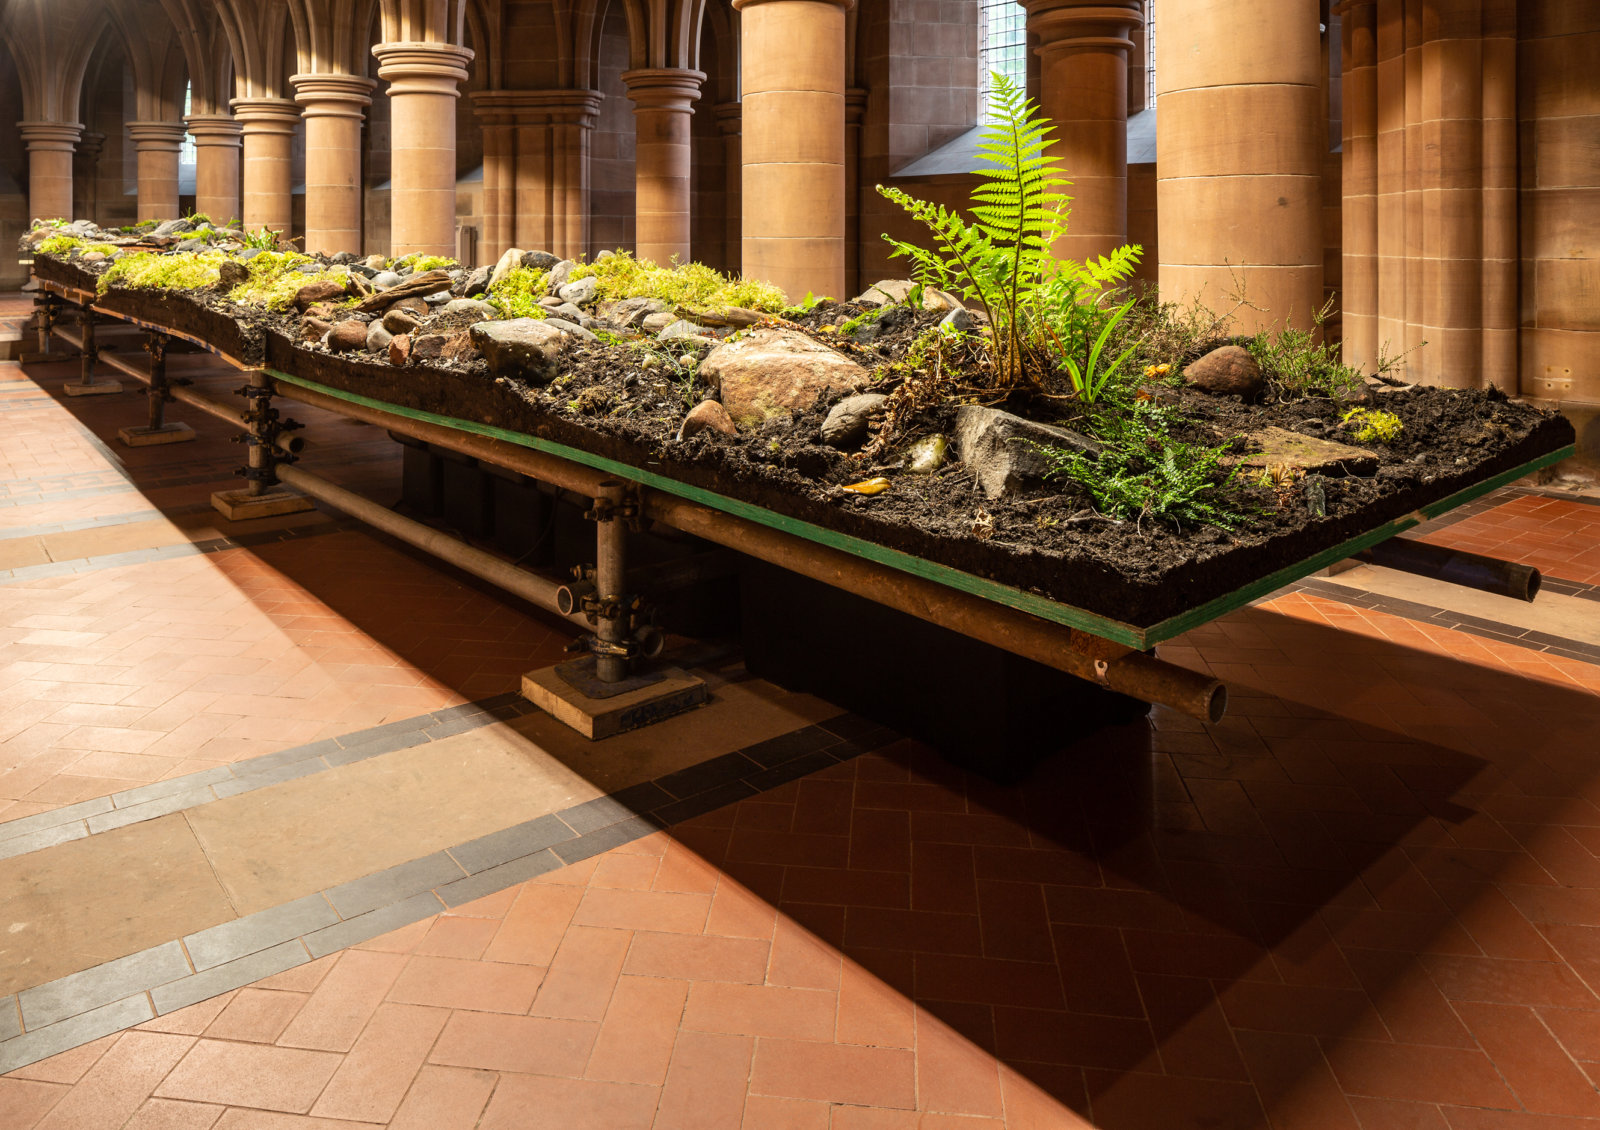 Abbas Akhavan, variations on a folly, 2022, scaffold, plywood, pond liner, aggregate, clay, garden silt, soil, rocks, water, pond pump and tubing, plants sourced from the gardens, hardware, full spectrum lights, installation dimensions variable